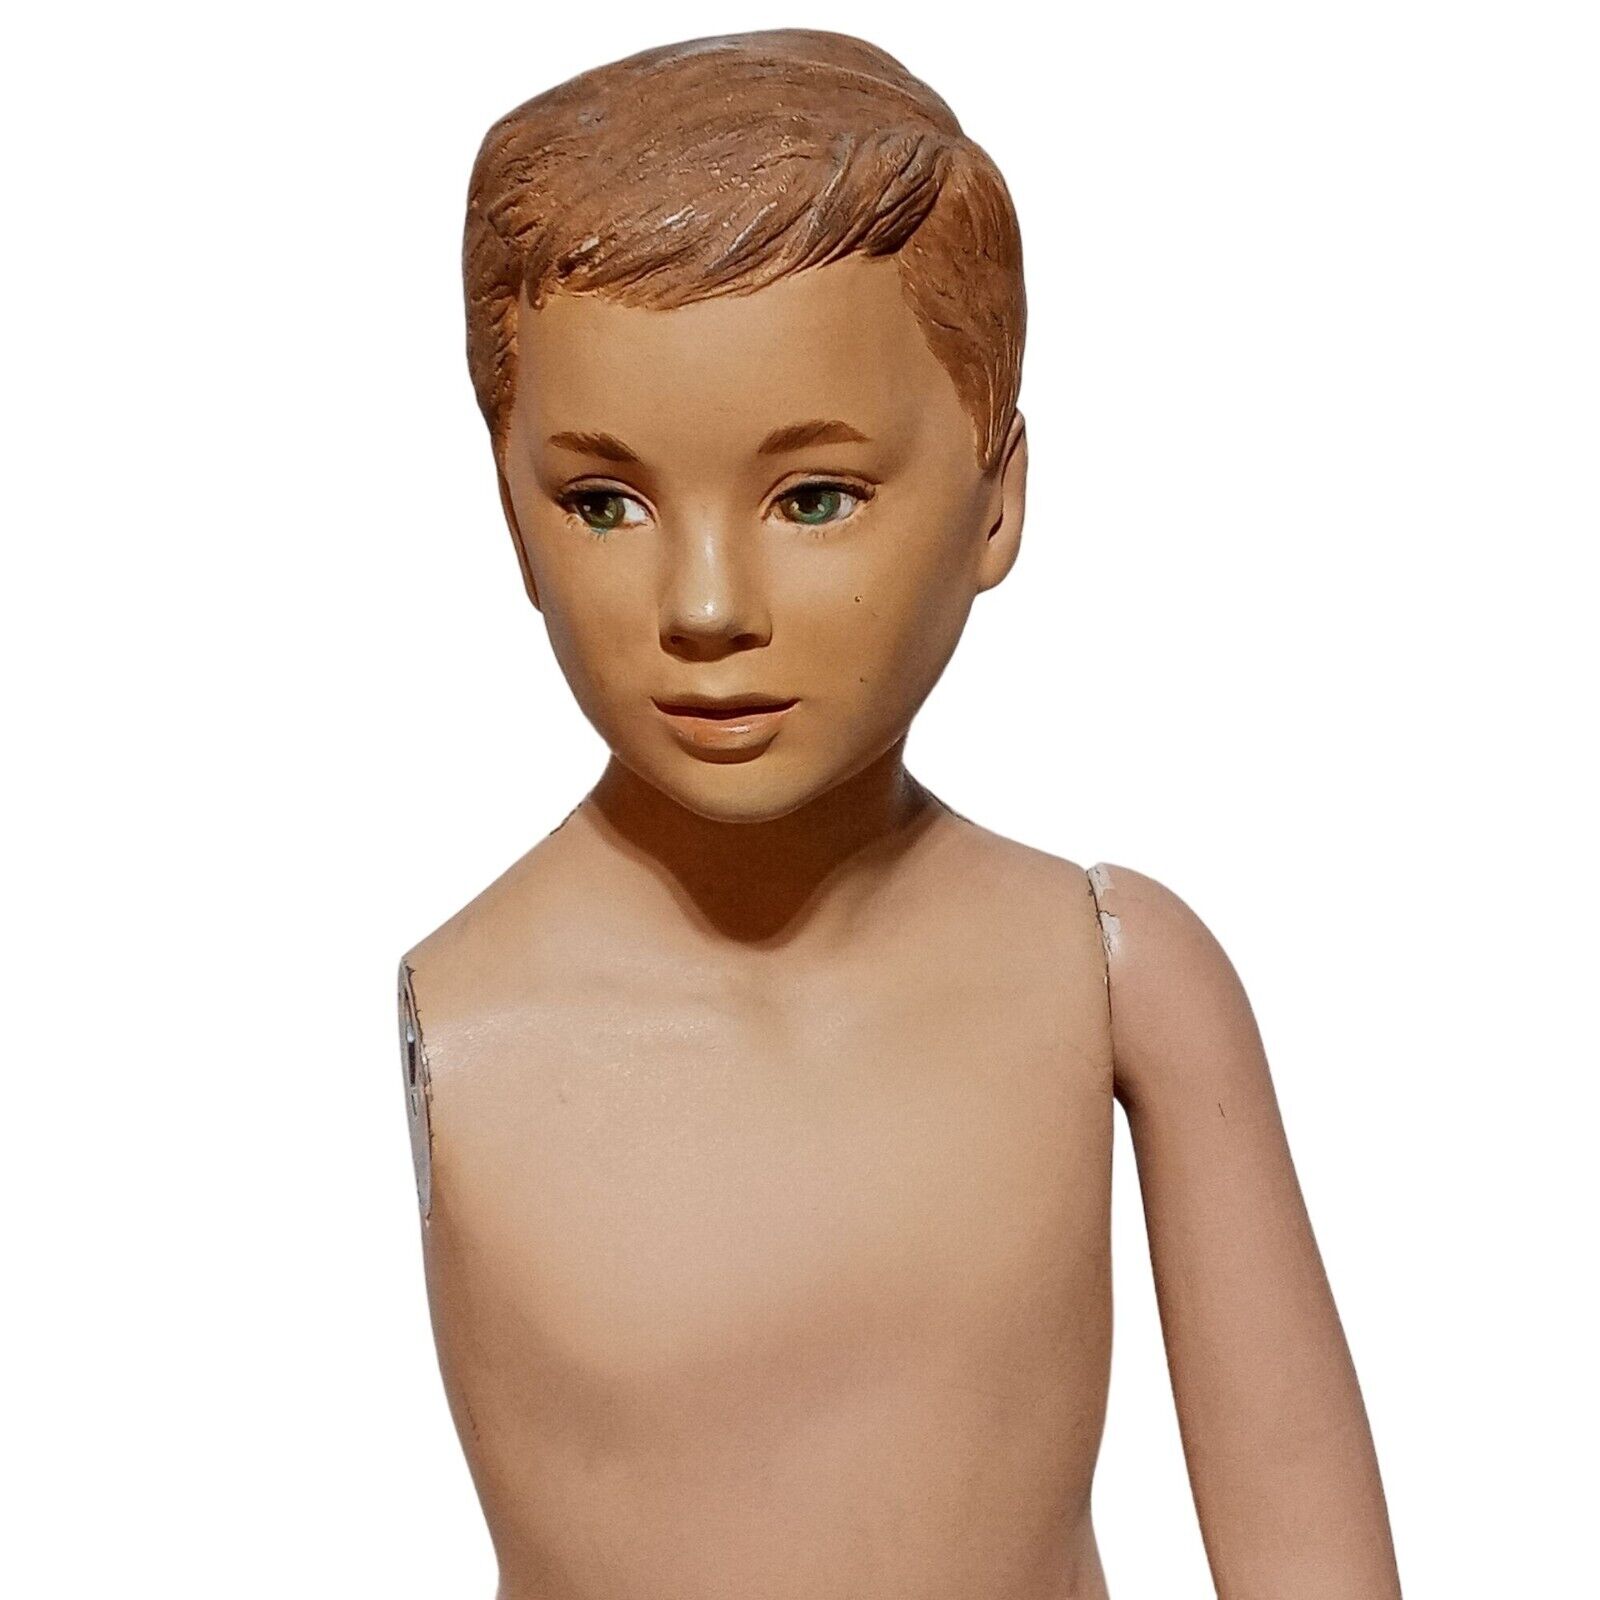 Vintage Boy Mannequin 4 Foot 1950s 1960s Store Display Male Child with Stand REA